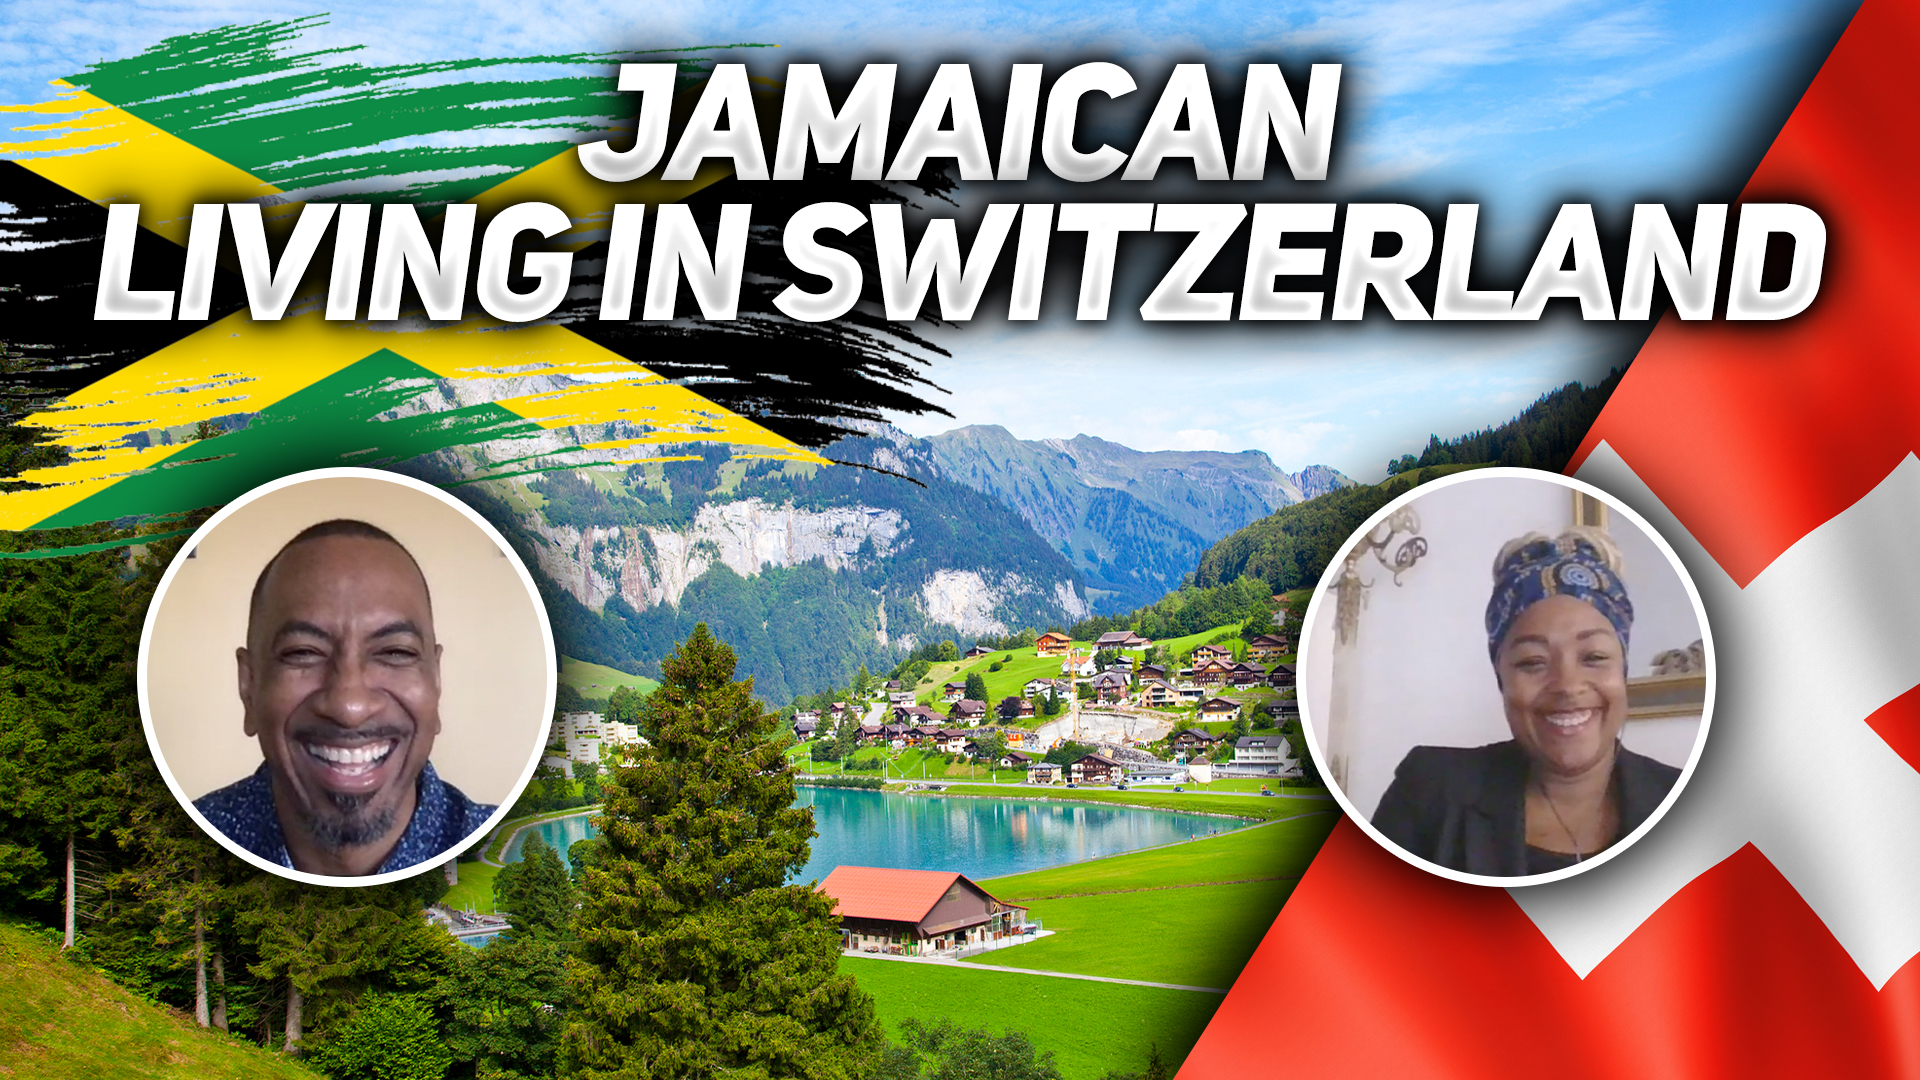 What’s It Like Being a Jamaican Living in Switzerland?